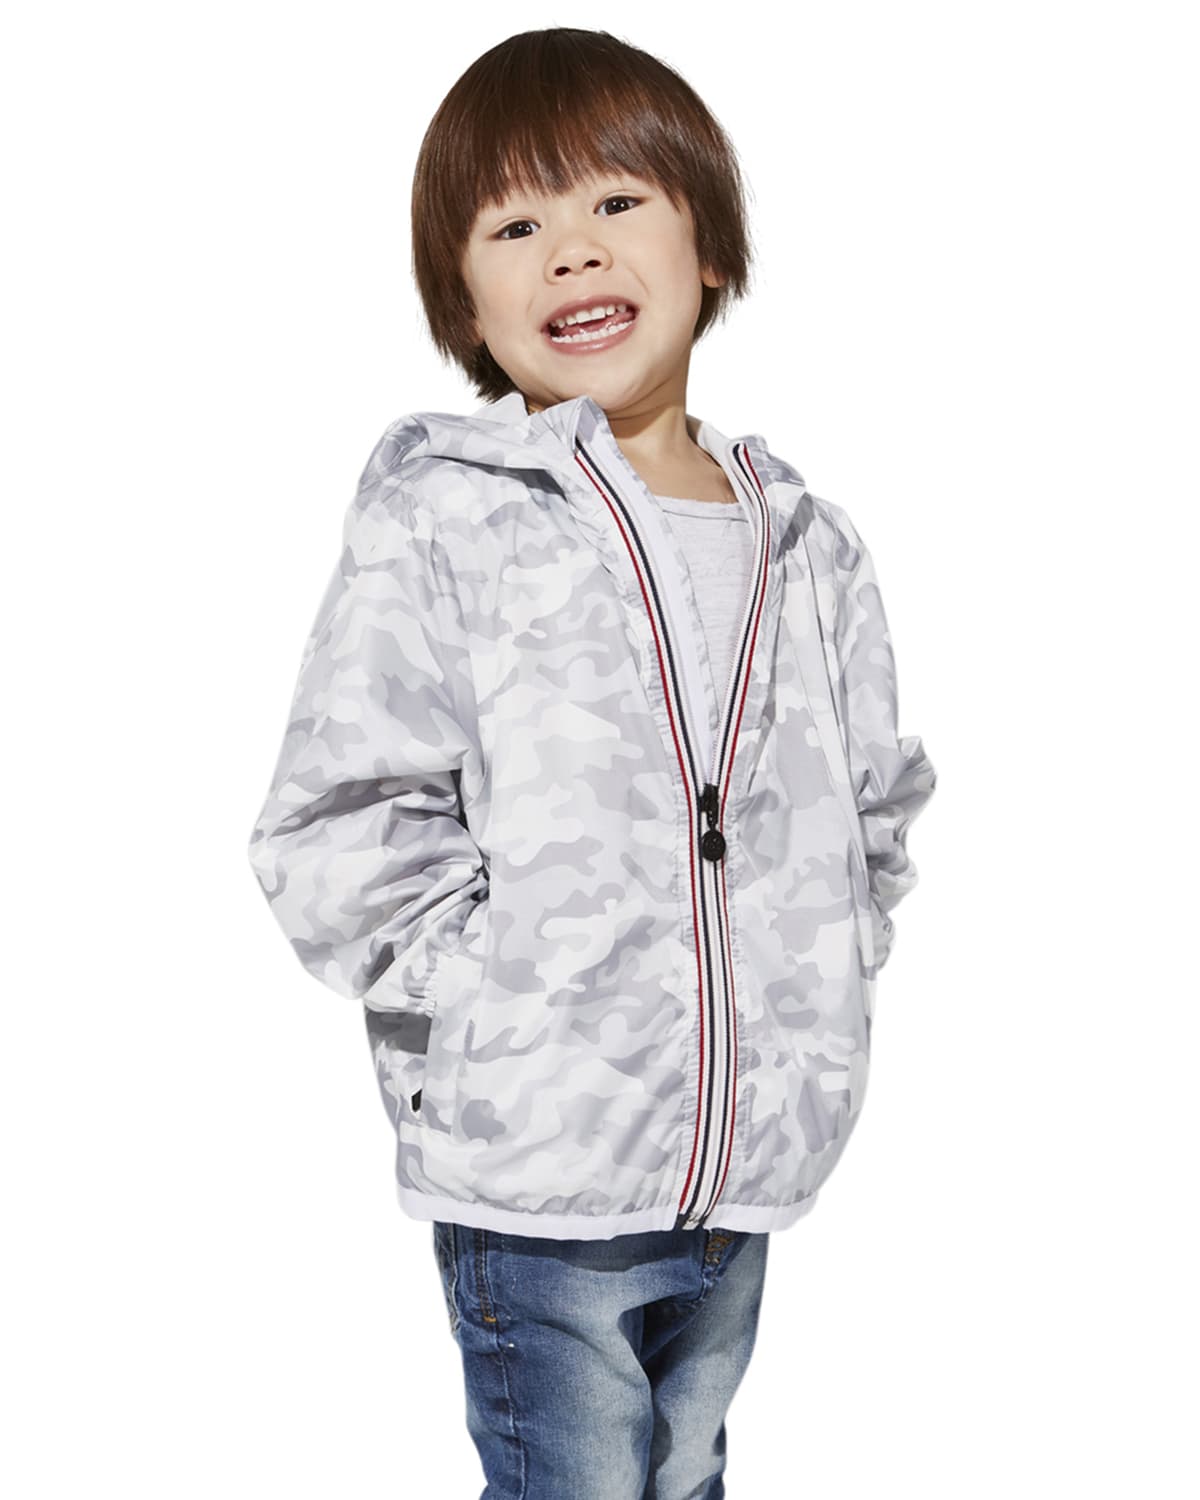 O8 Lifestyle Kid's Sam Printed Hooded Jacket In White Camo